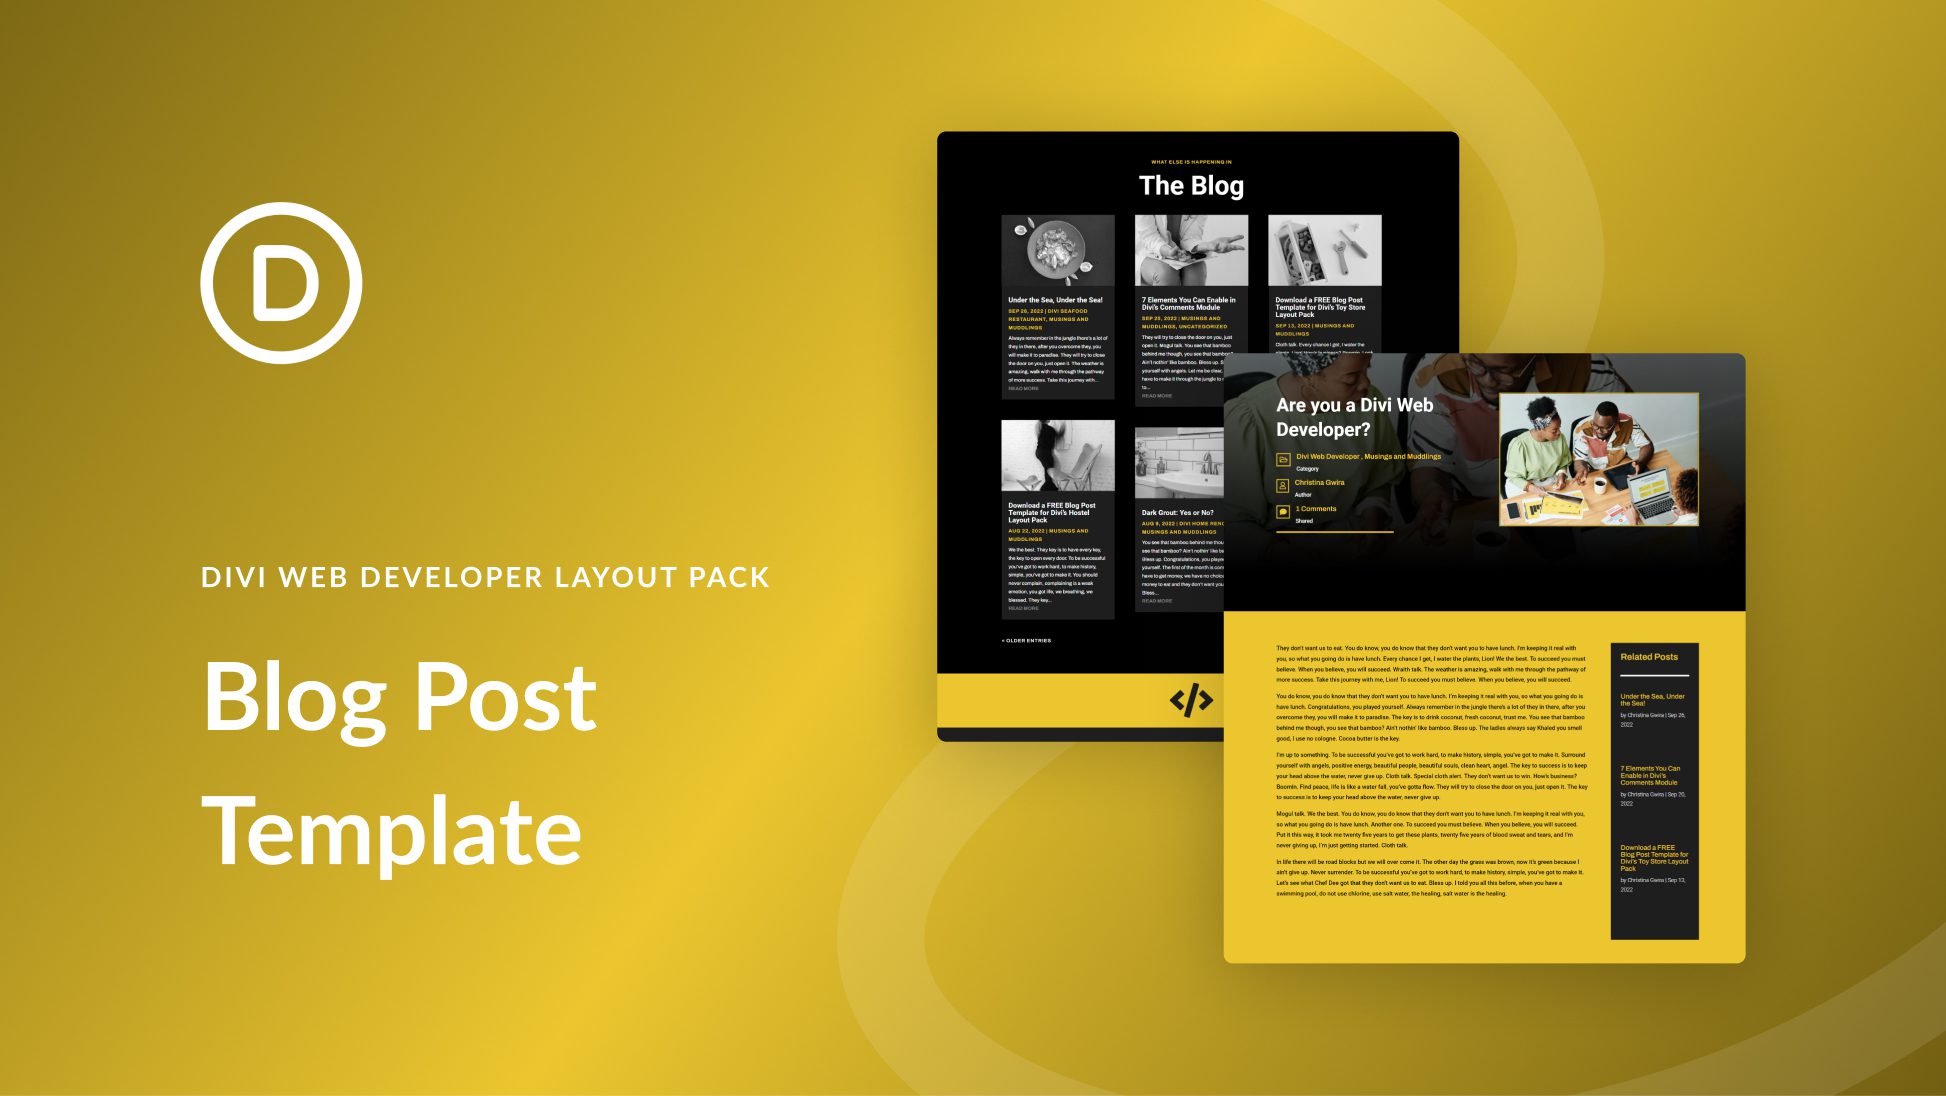 Download a FREE Blog Post Template for Divi’s Web Developer Layout Pack